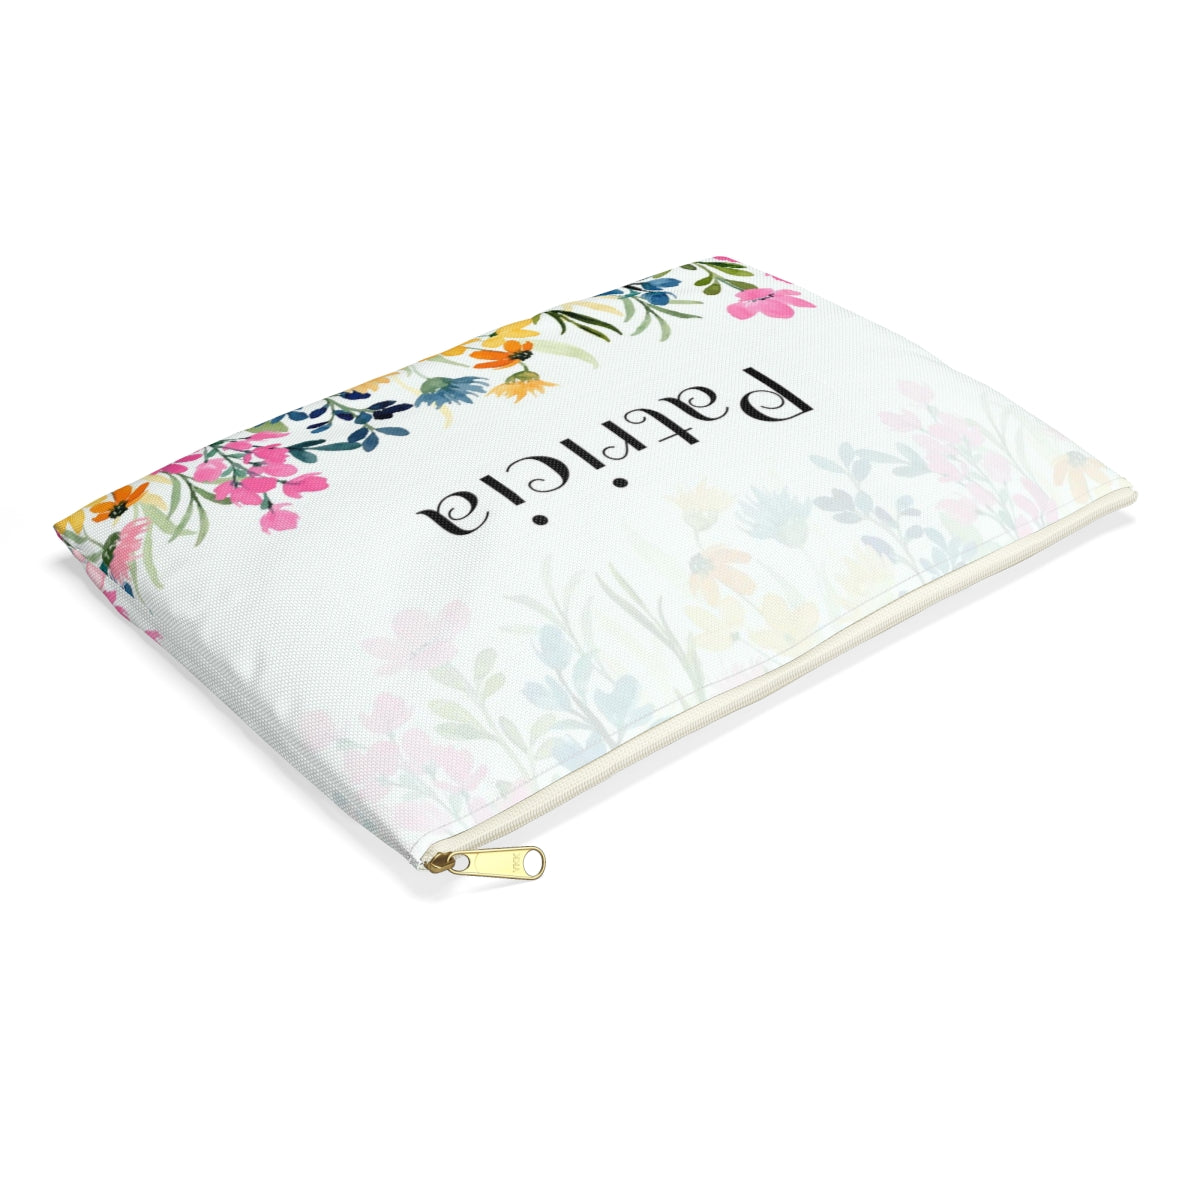 Custom Best Friend Gift, Wildflowers Makeup Bag Personalized Name Case Floral Monogram Zipper Travel Cosmetics Pouch Starcove Fashion